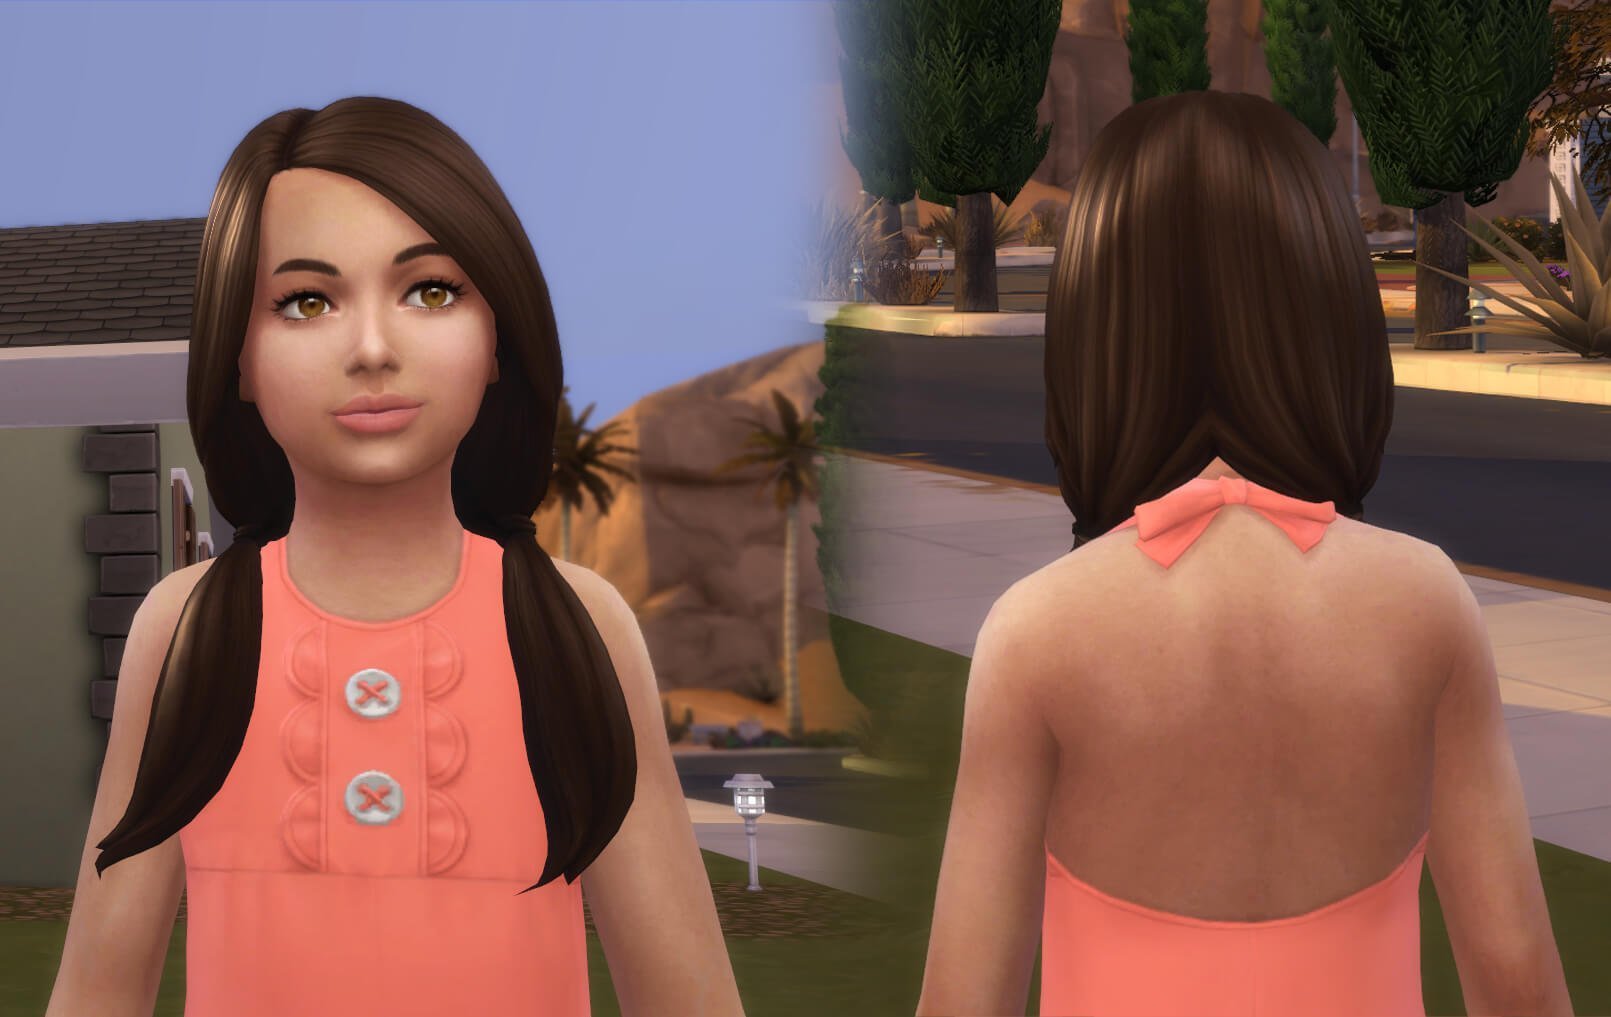 Rosemarie Hairstyle for Girls